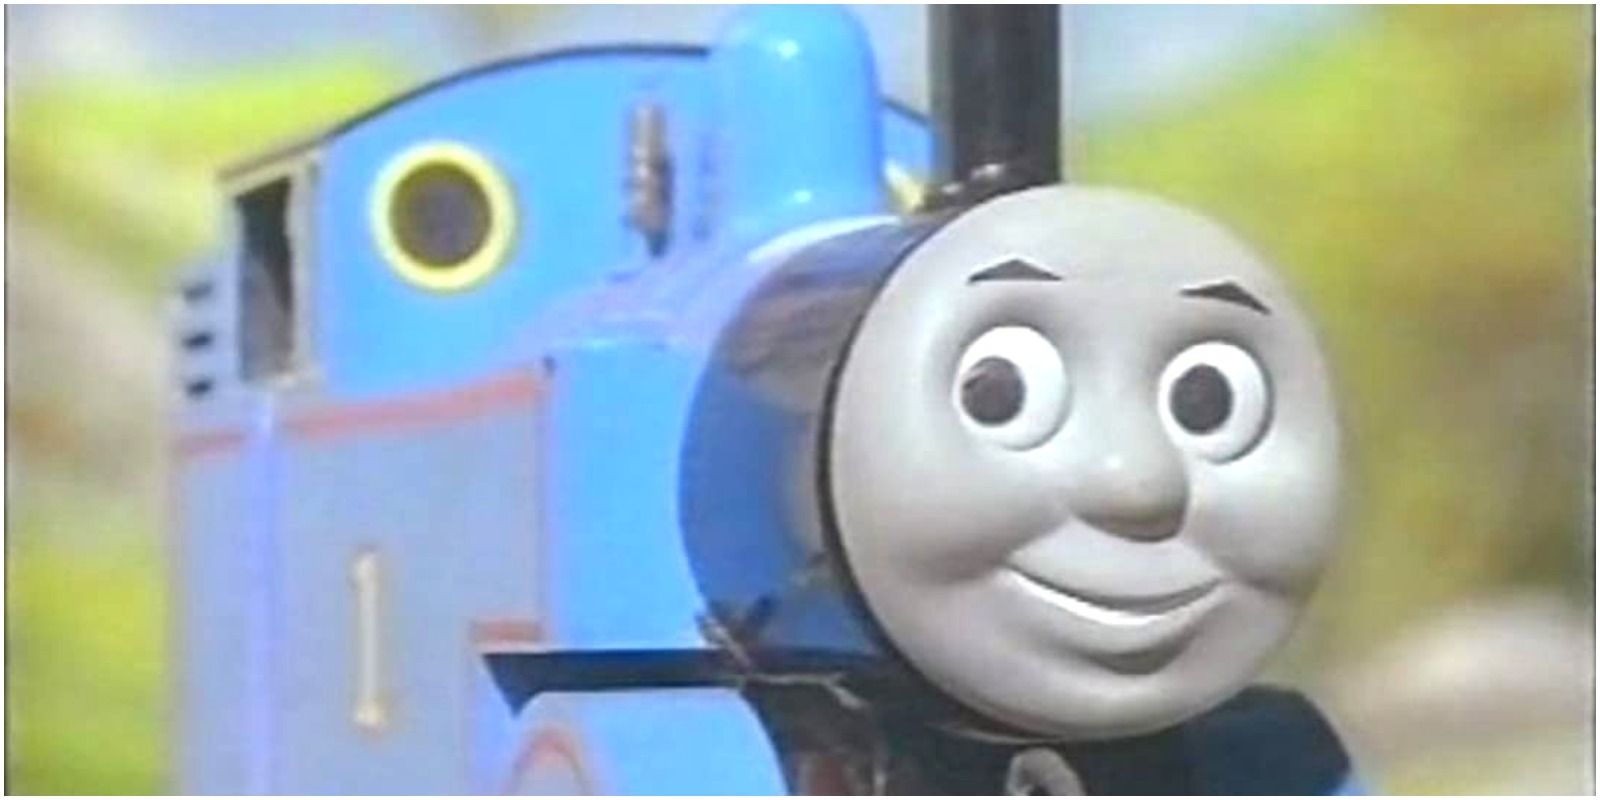 Thomas the Tank Engine Toy from the Thomas and Friends kid's show